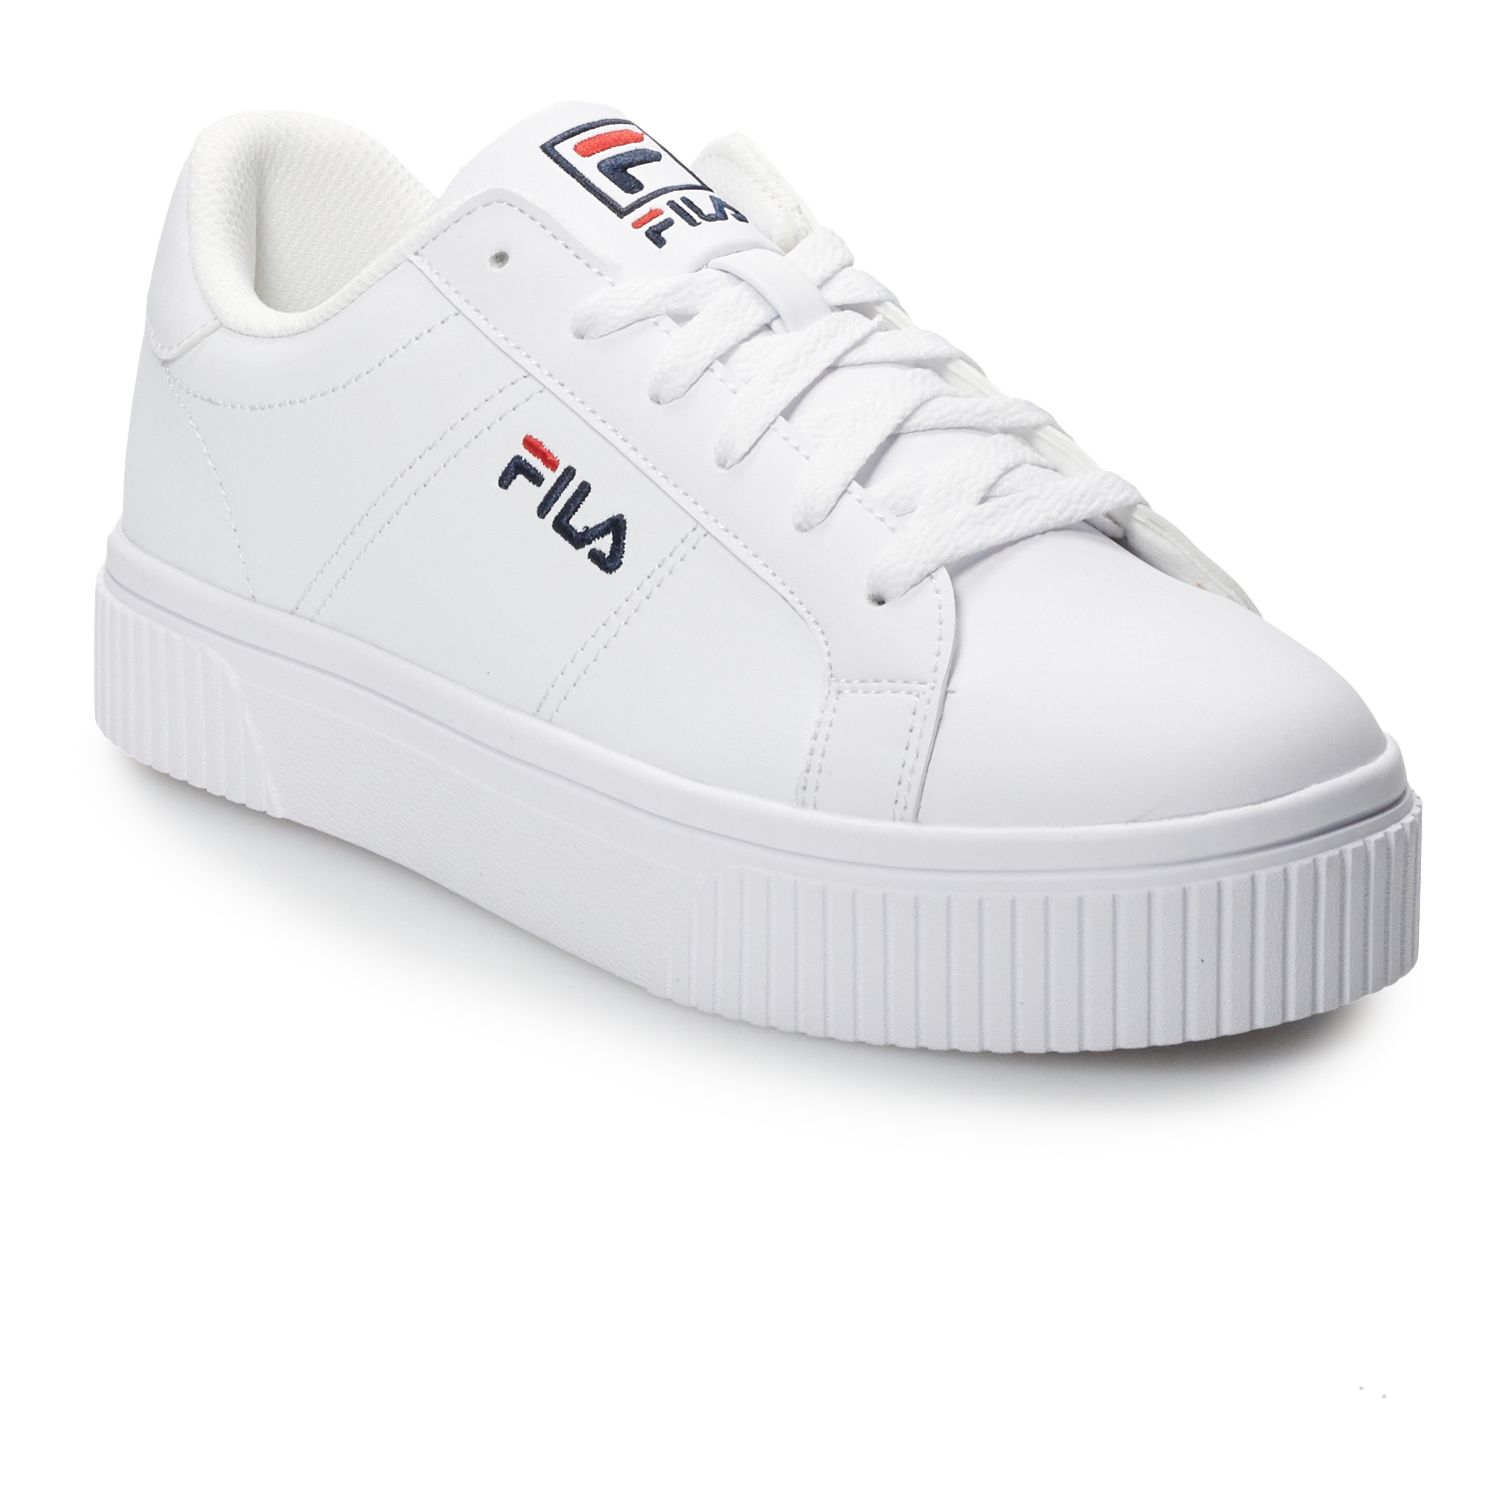 the new fila boots